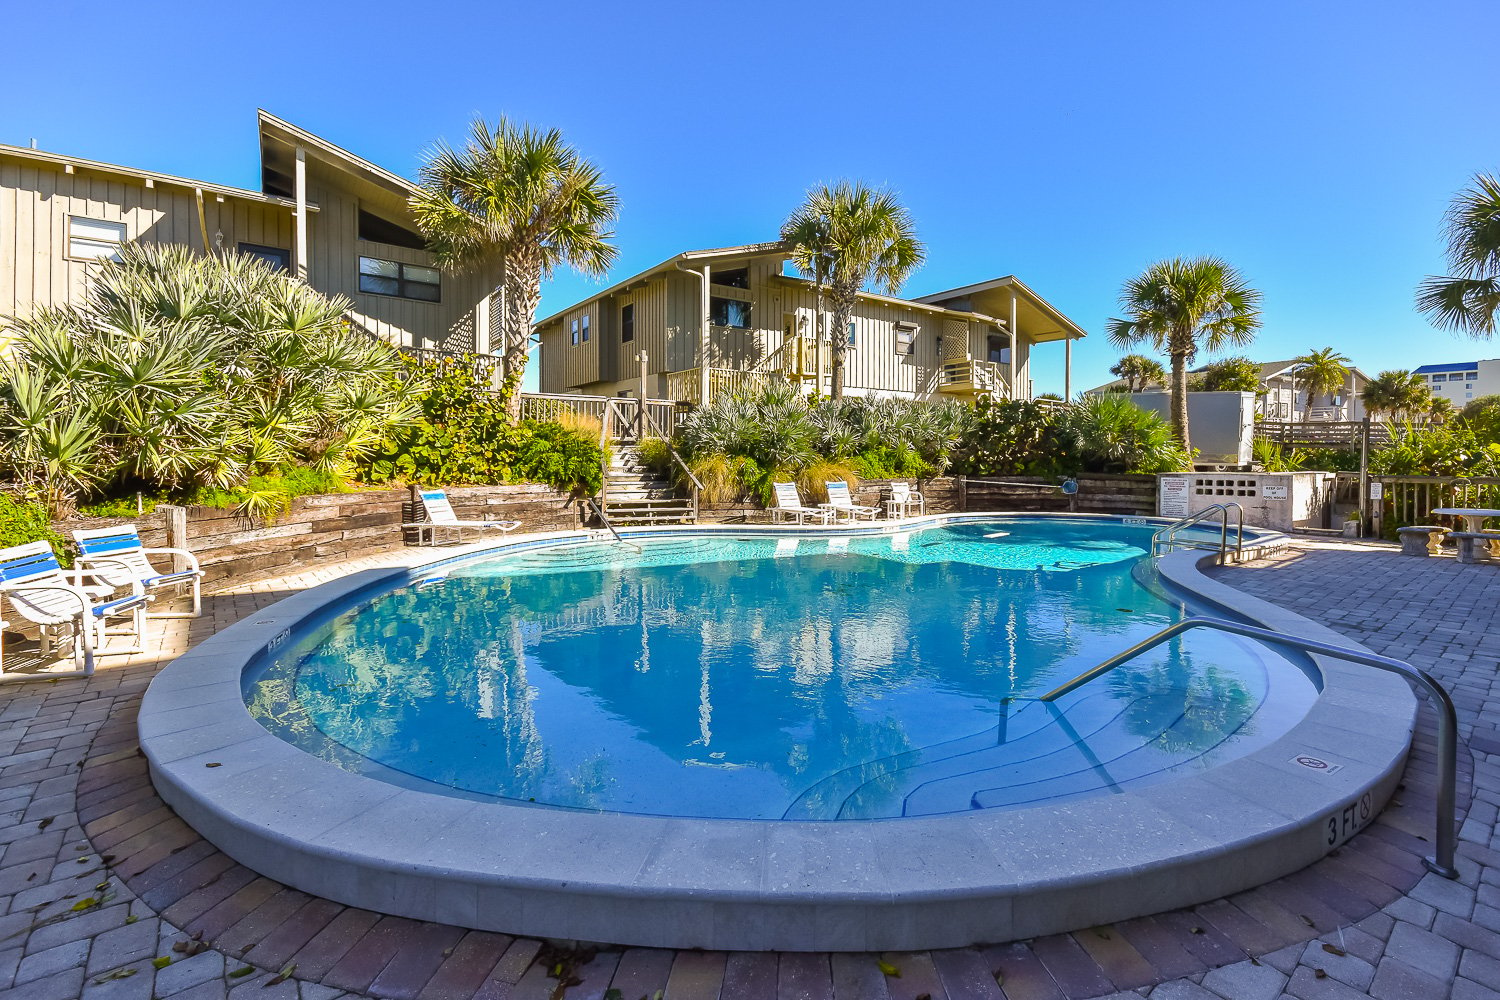 Community Pool with tropical landscaping